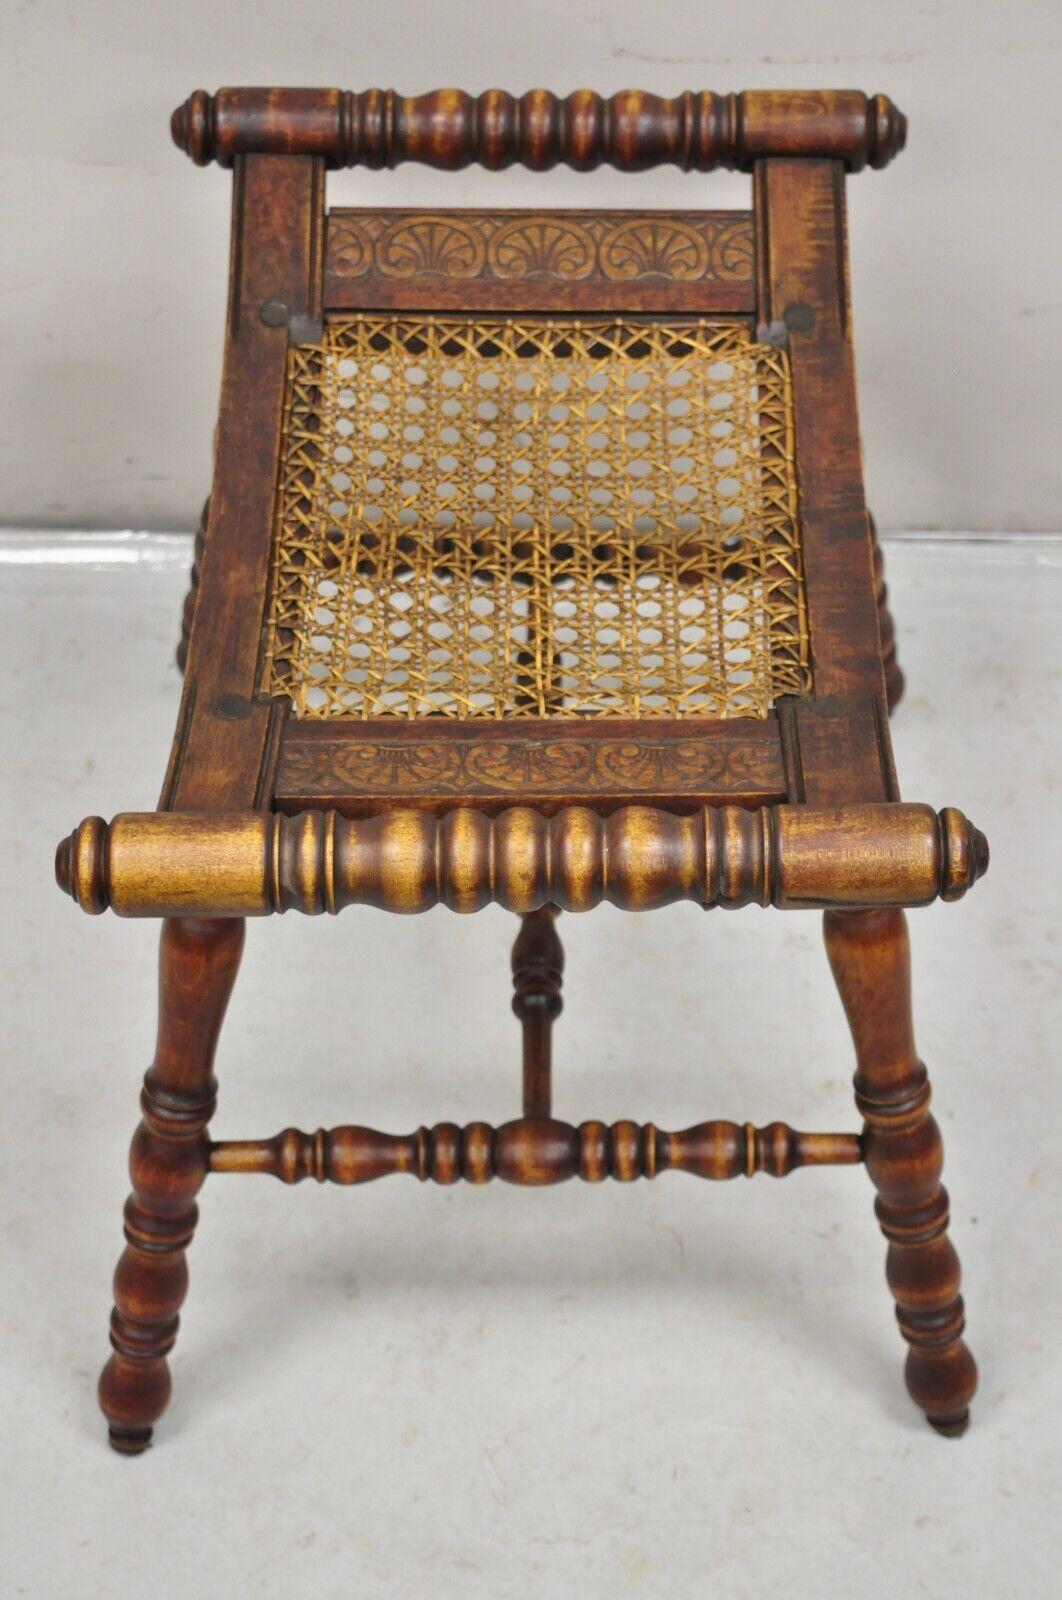 Antique English Jacobean Turn Carved Walnut Cane Seat Spindle Stool For Sale 5